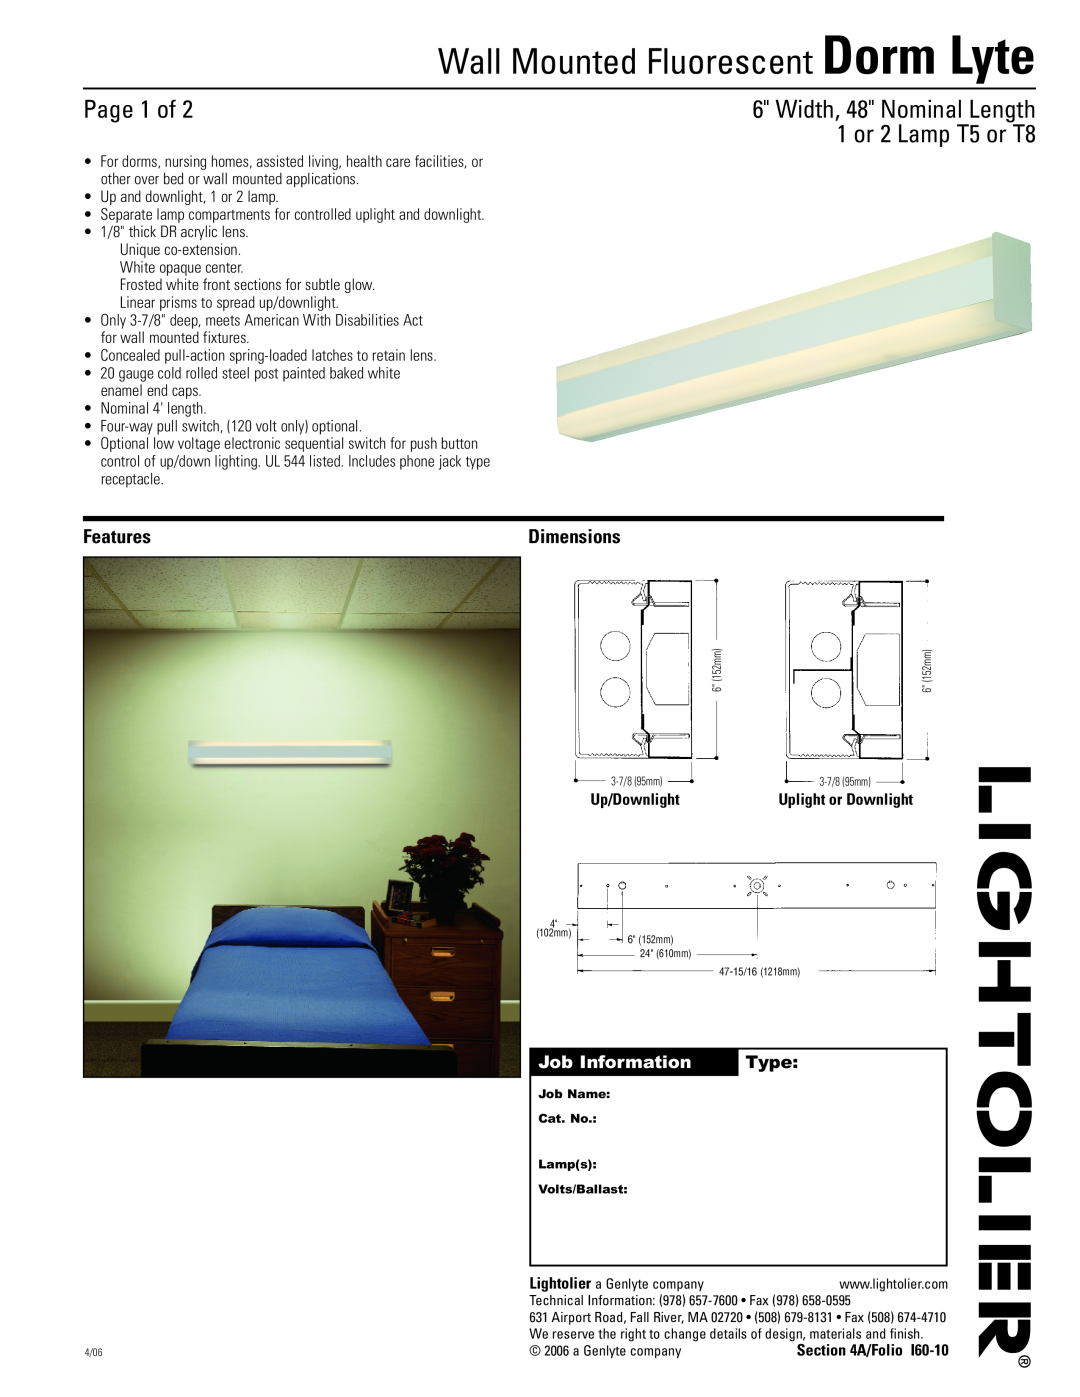 Lightolier dimensions Wall Mounted Fluorescent Dorm Lyte, Page 1 of, Features, Job Information, Type, Dimensions 